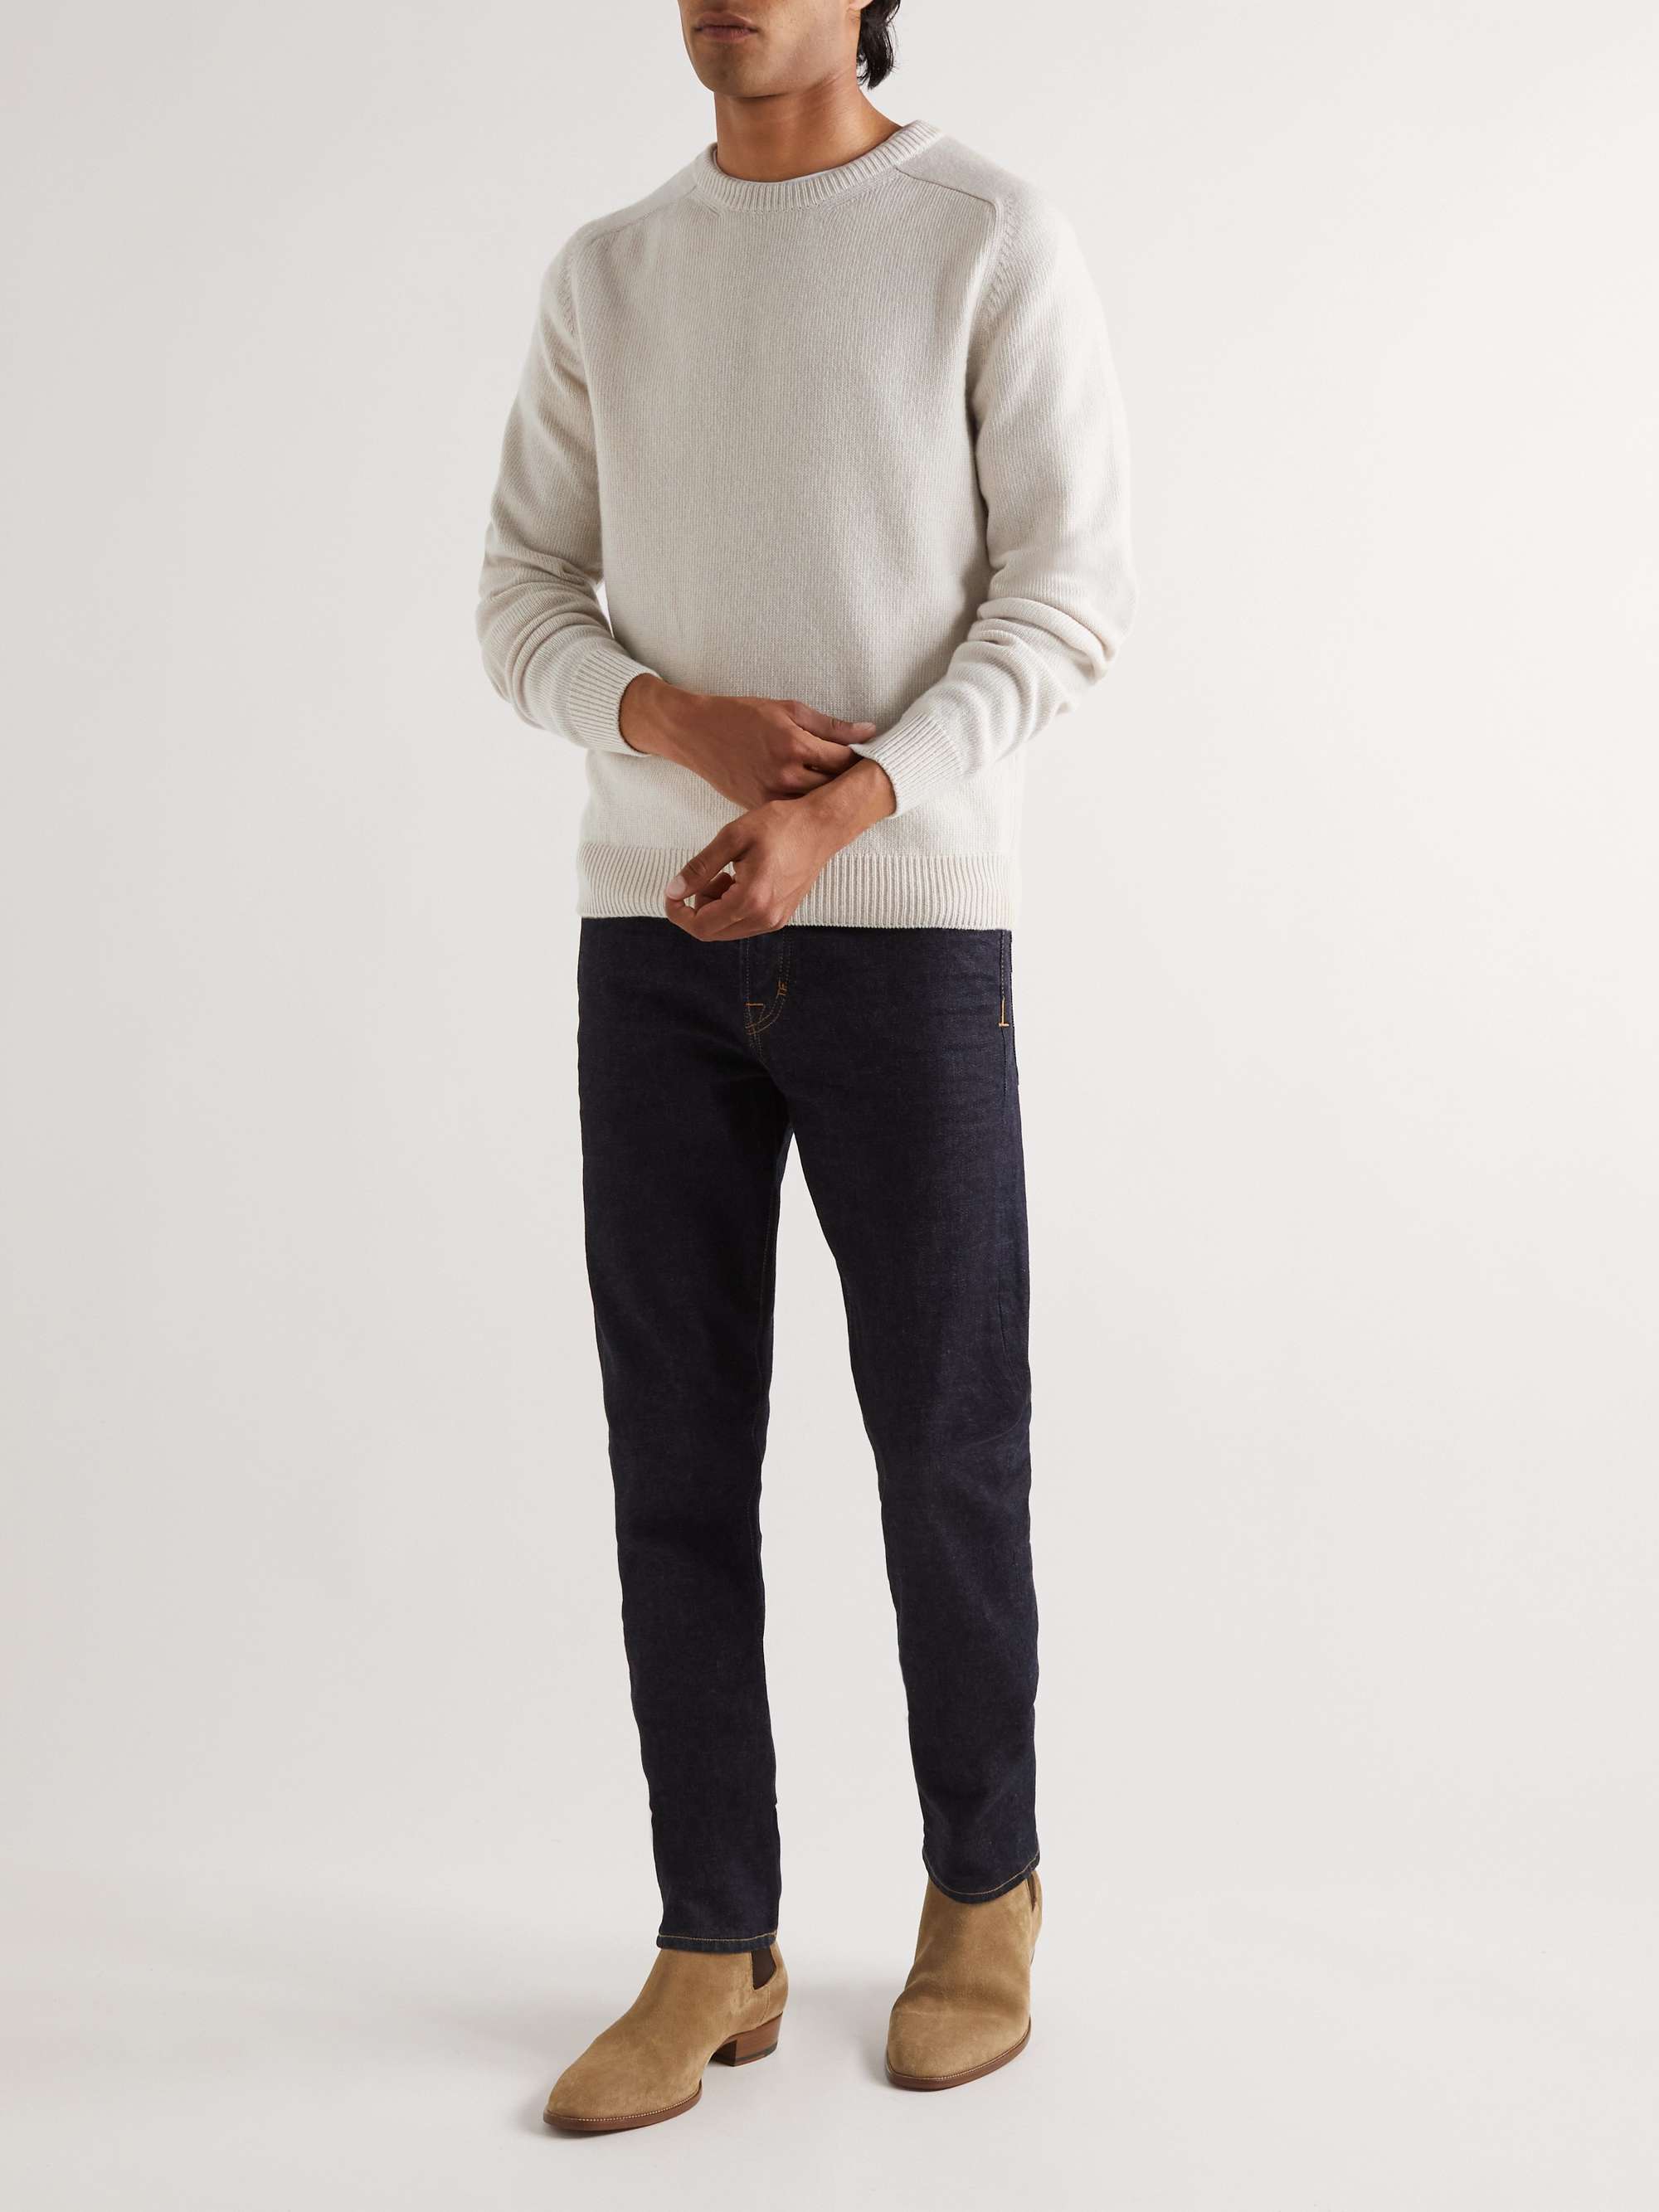 TOM FORD Cashmere Sweater